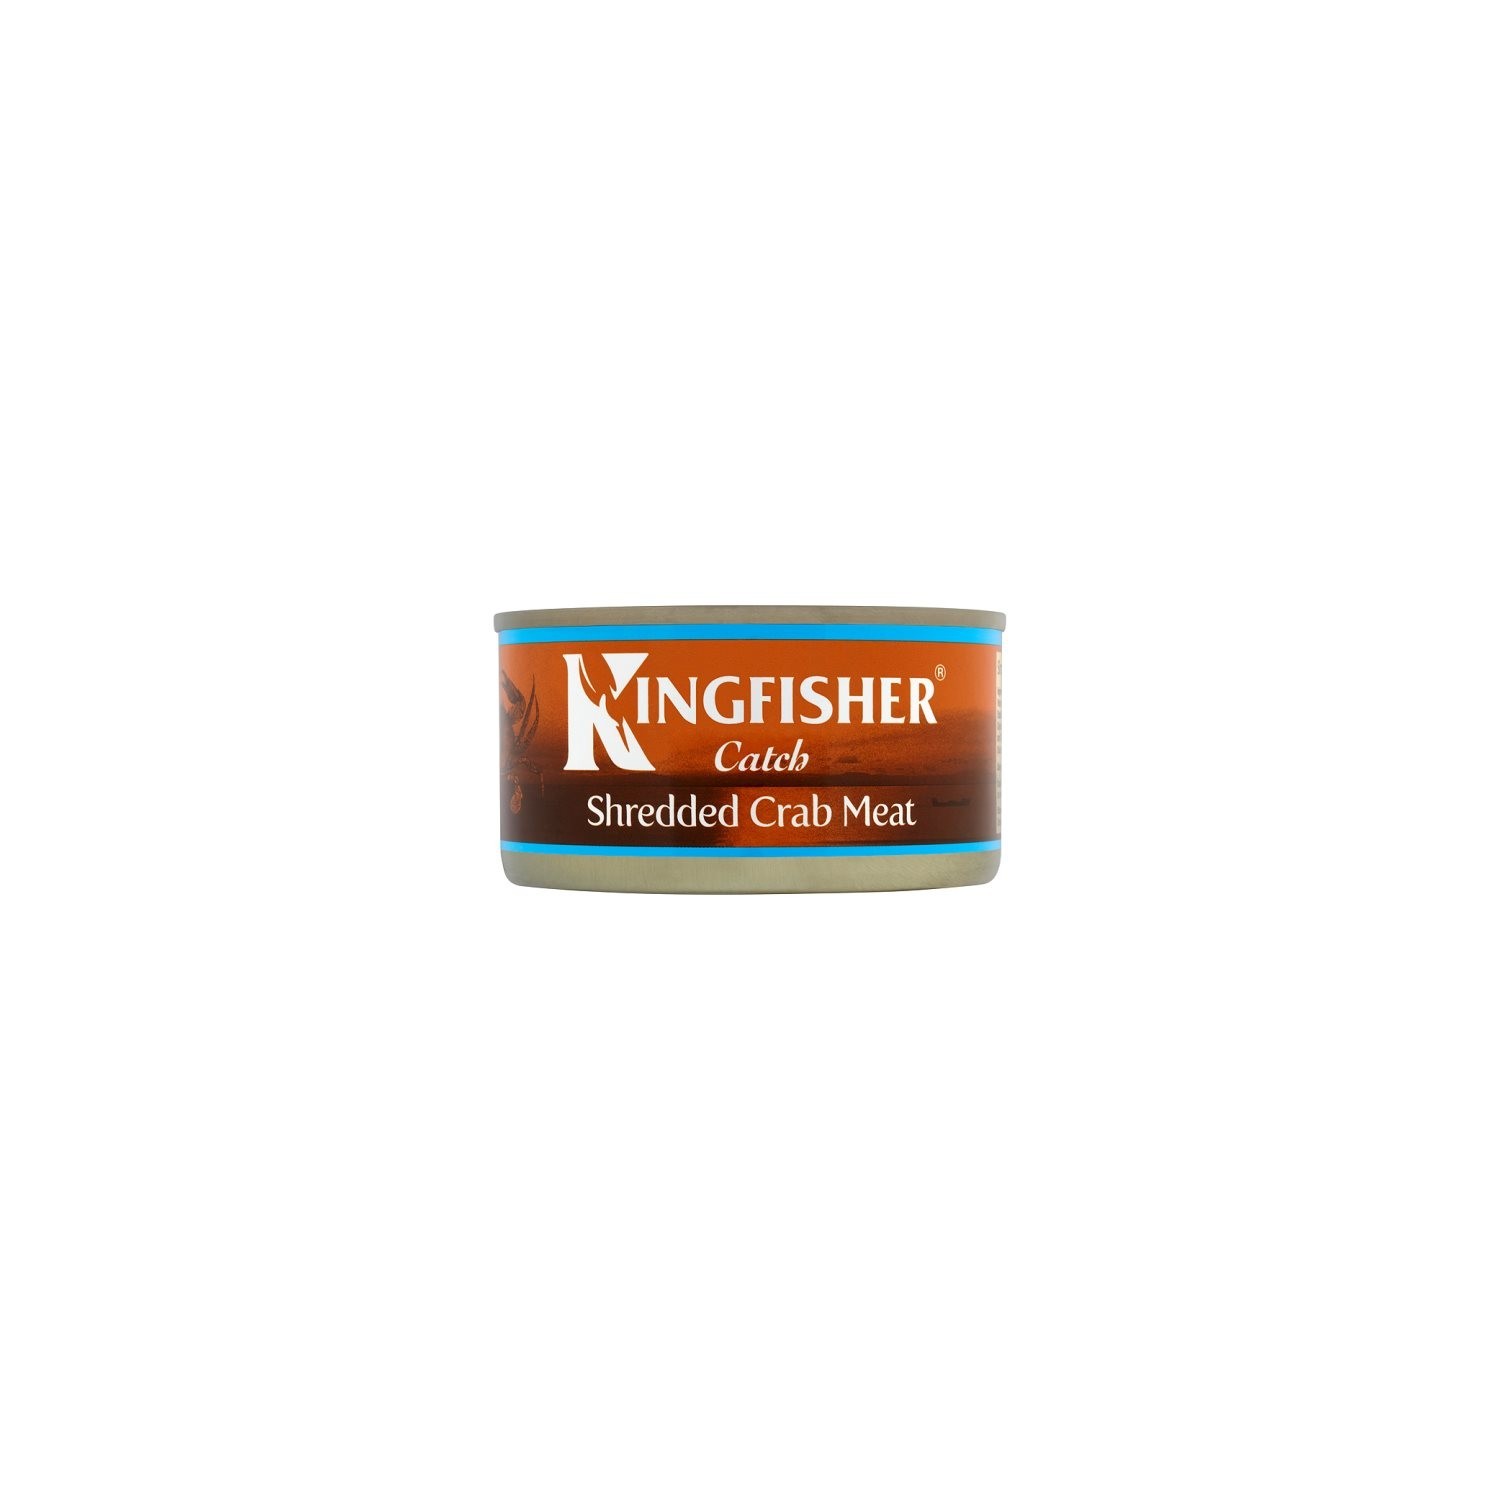 Kingfisher 170g Shredded Crab Meat